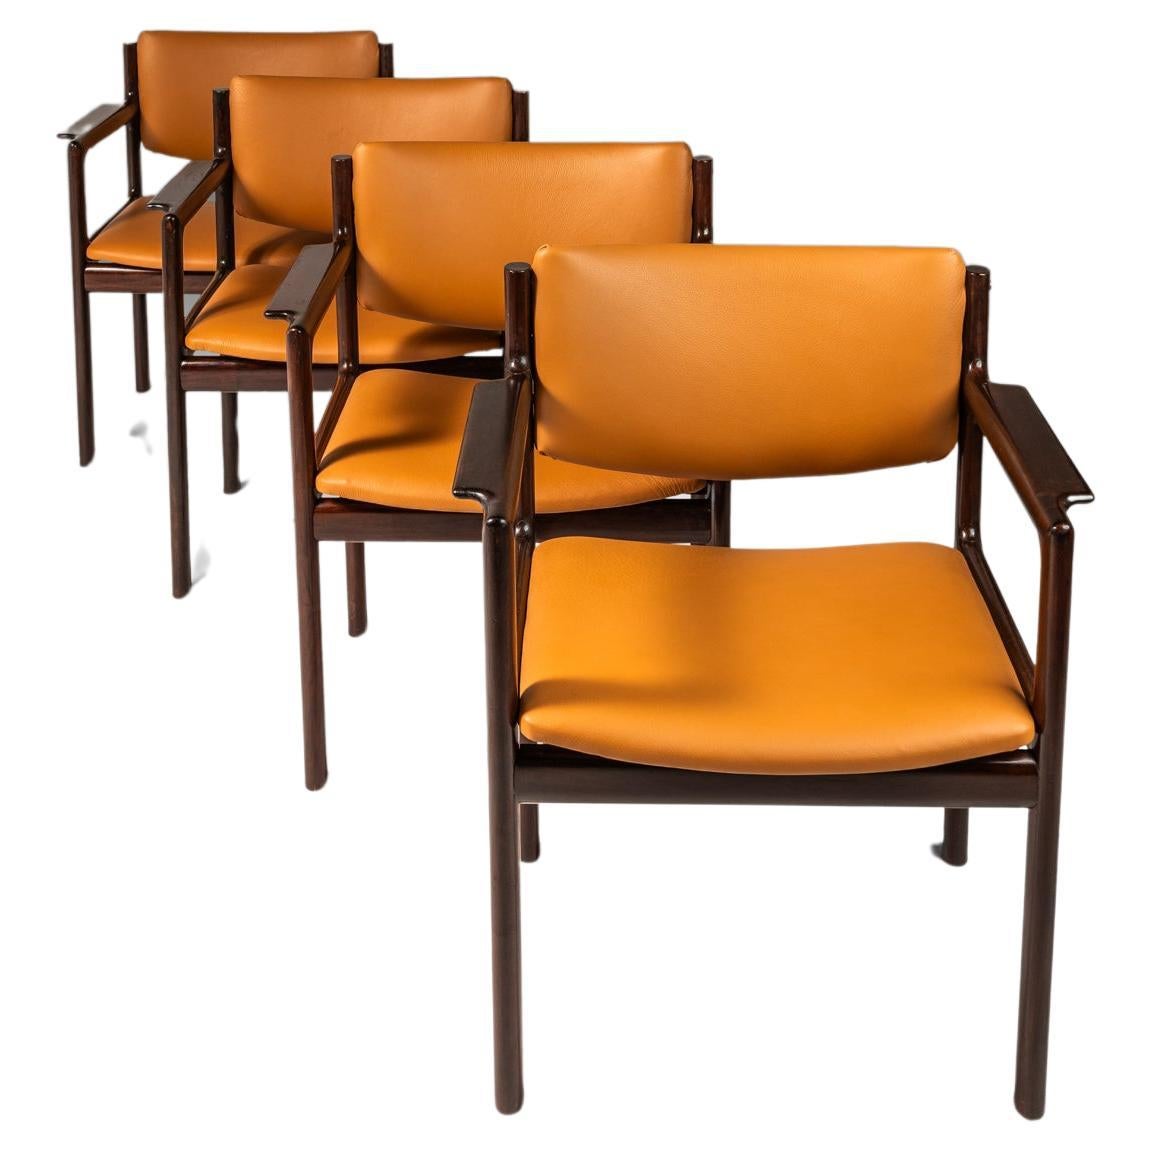 Set of 4 Mahogany Arm Chairs, Caramel Leather by Danish Overseas Imports, 1960's For Sale